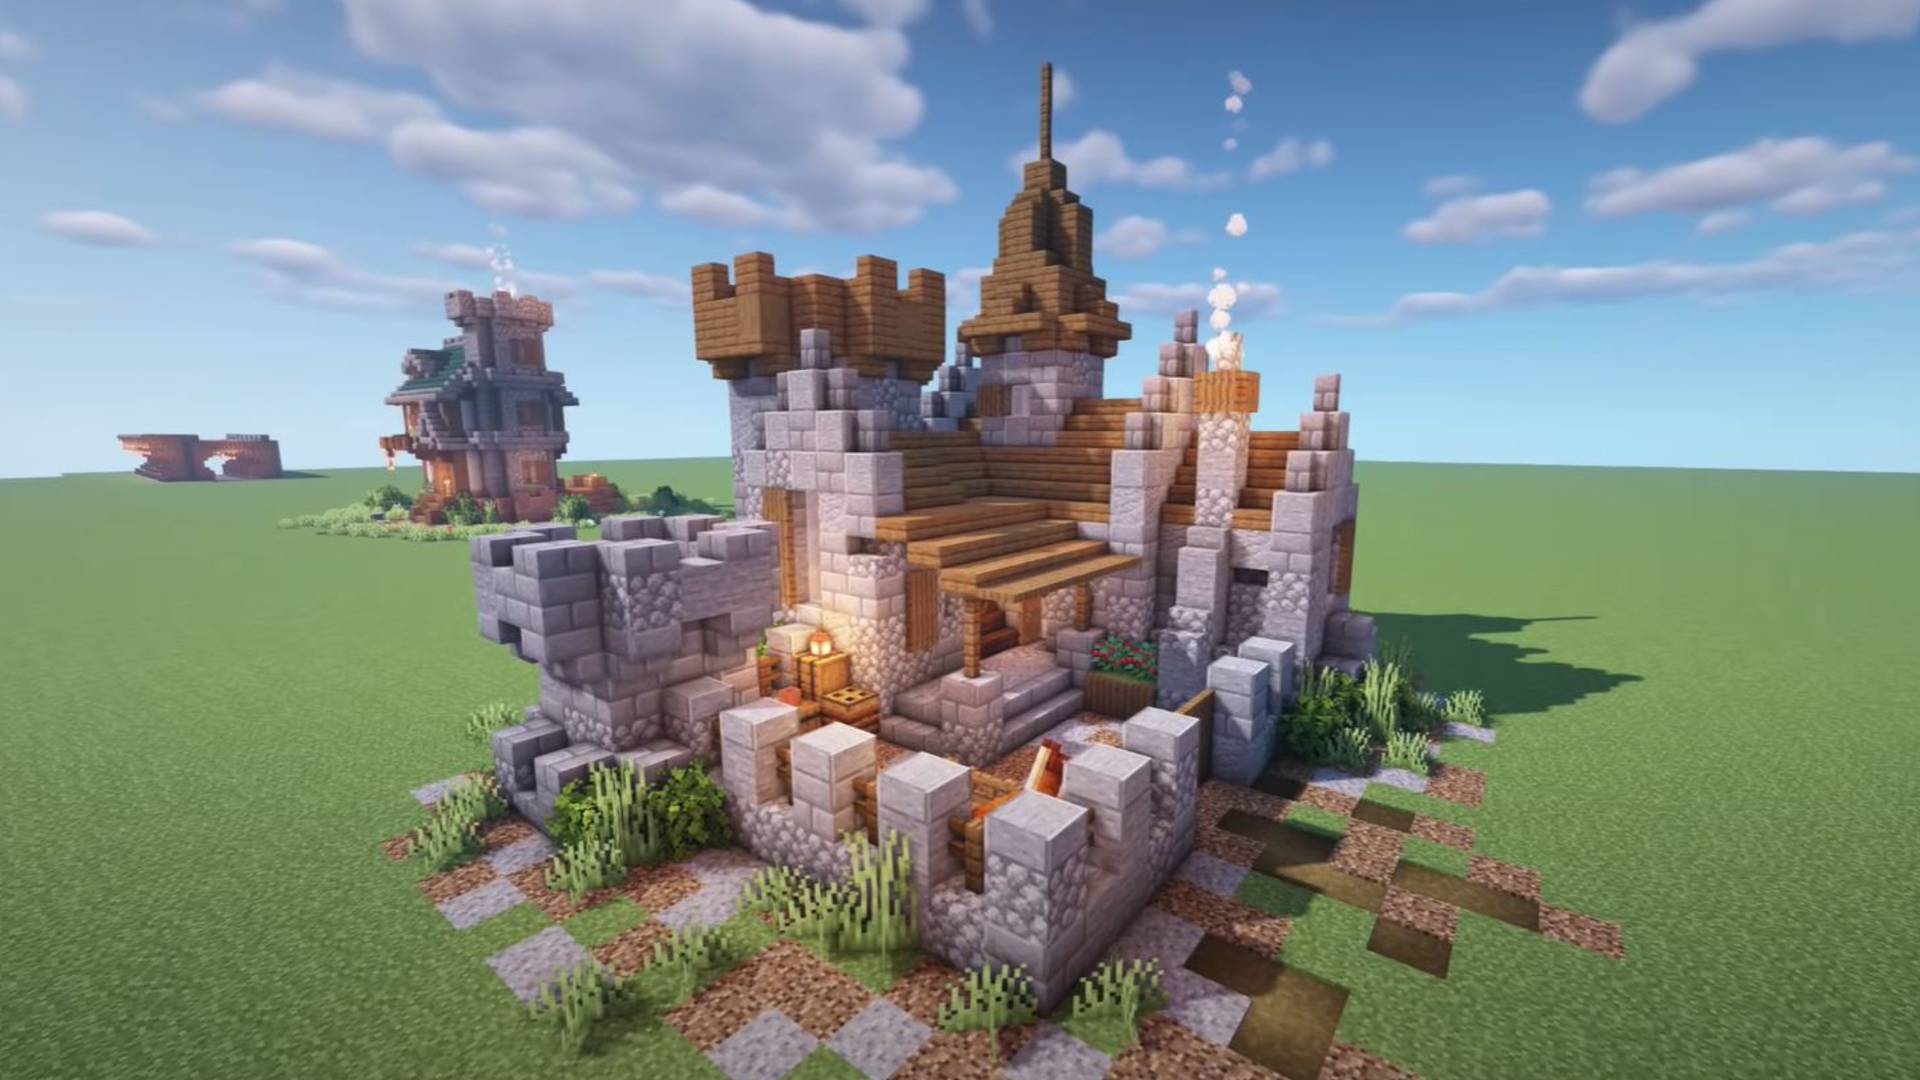 Minecraft castle ideas: how to build a castle in Minecraft using ...